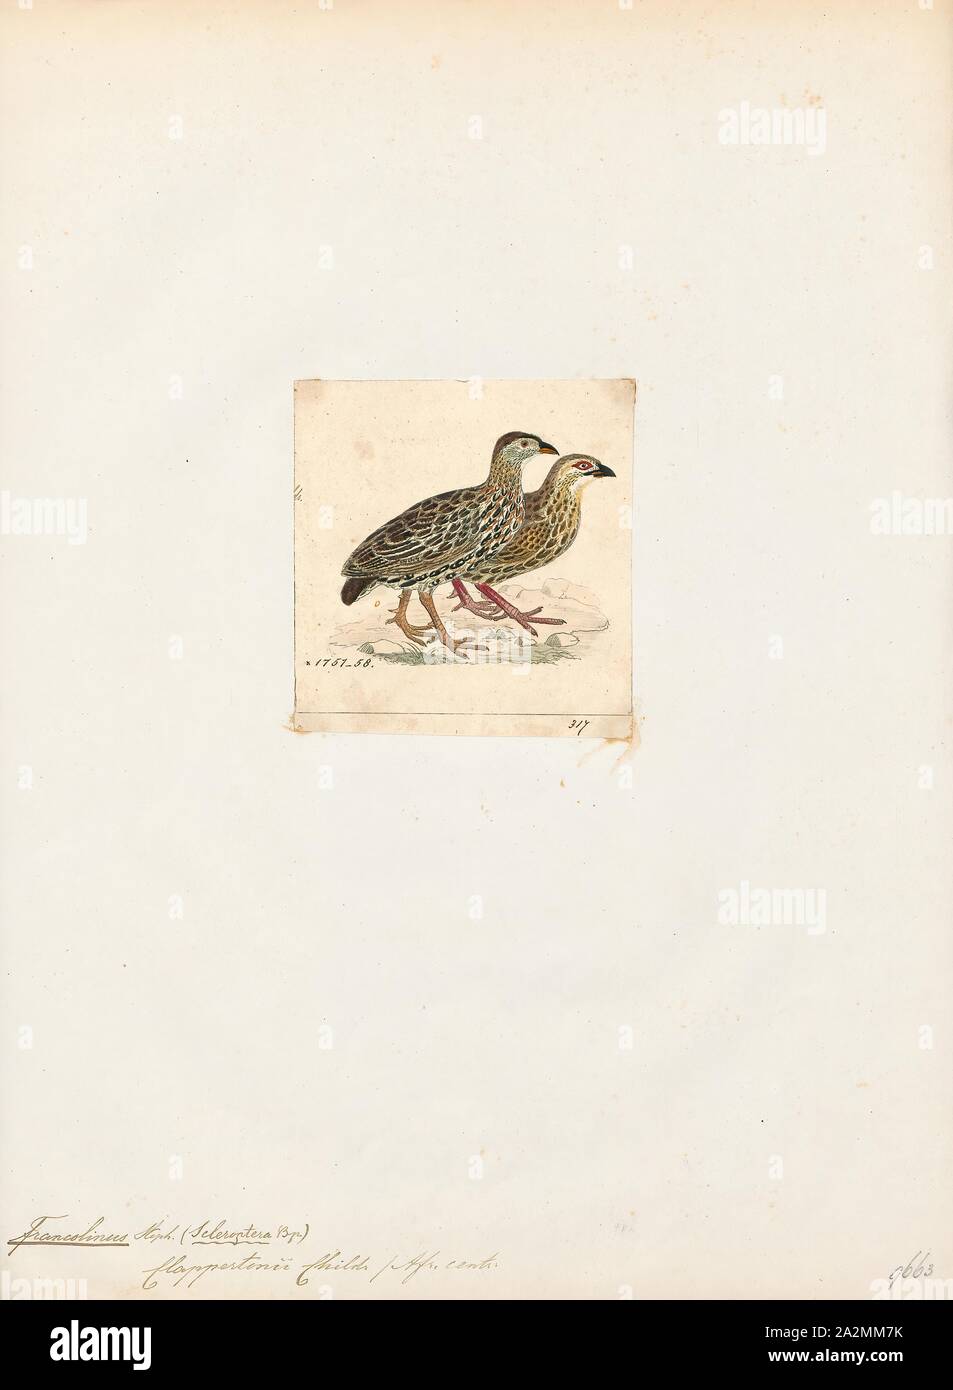 Francolinus clappertoni, Print, The Clapperton's francolin (Pternistis clappertoni) is a species of bird in the family Phasianidae. It is found in Cameroon, Central African Republic, Chad, Eritrea, Ethiopia, Mali, Mauritania, Niger, Nigeria, Sudan, and Uganda., 1820-1863 Stock Photo